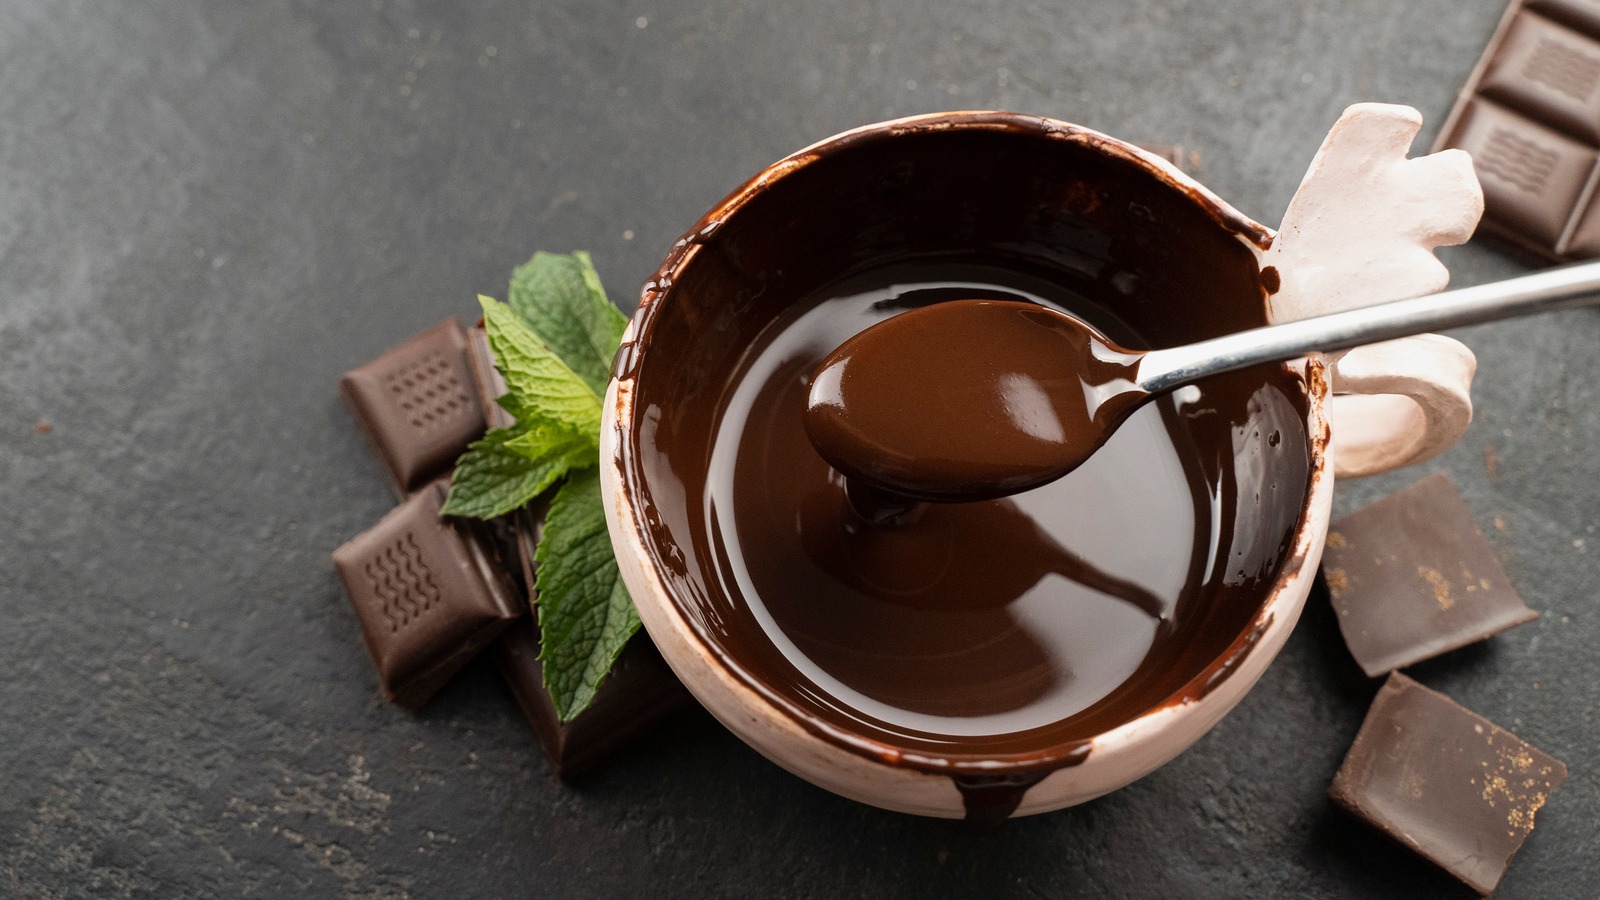 What You Should Know Before Melting Chocolate In The Microwave